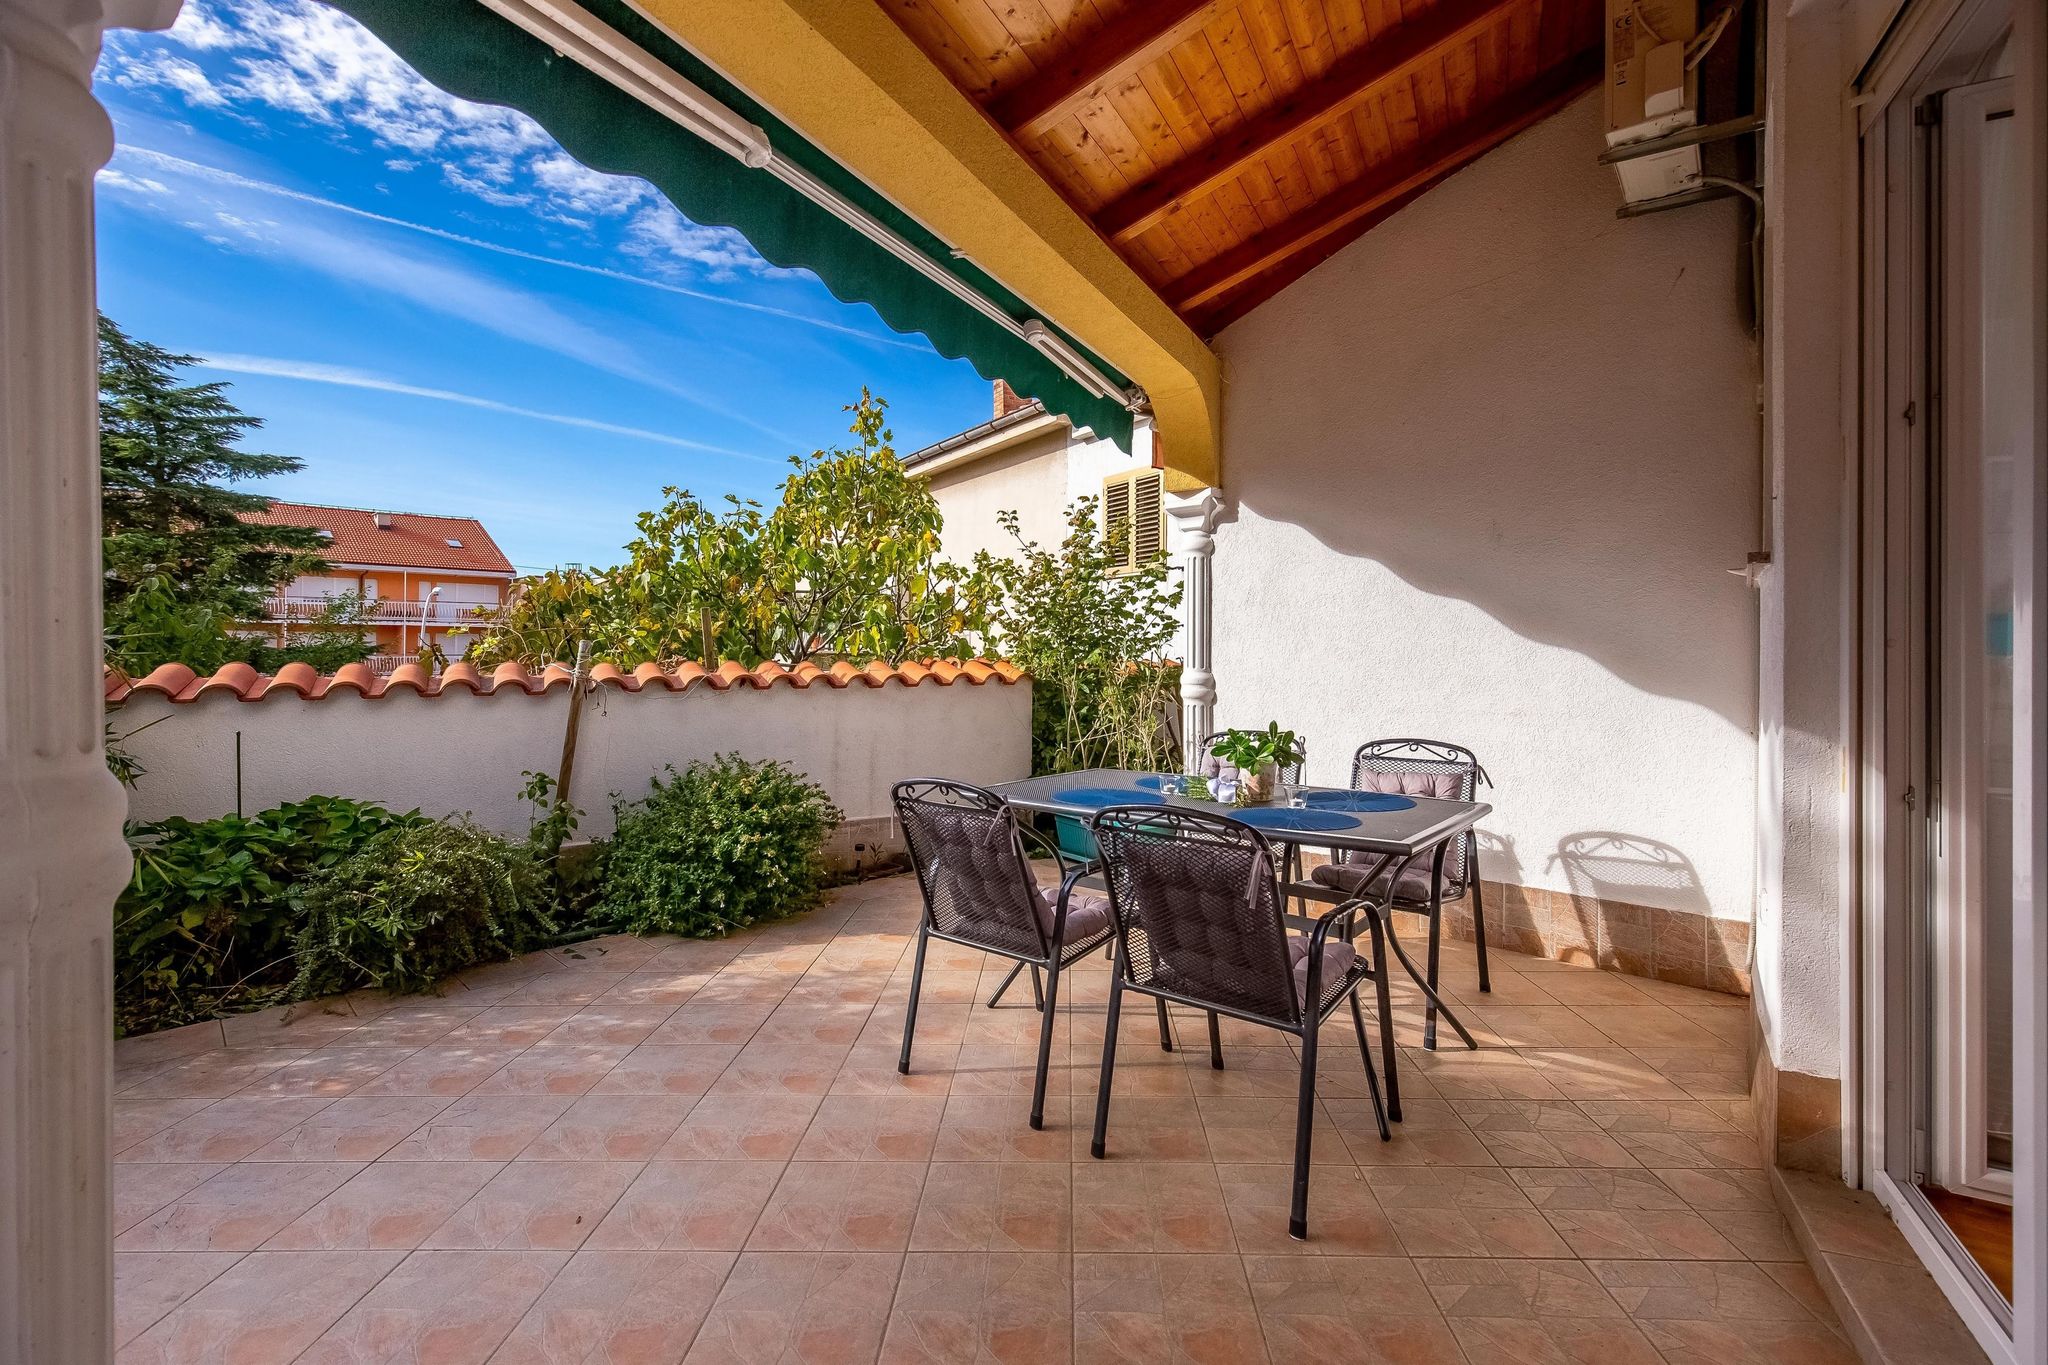 Lovely apartment in Crikvenica with roofed terrace